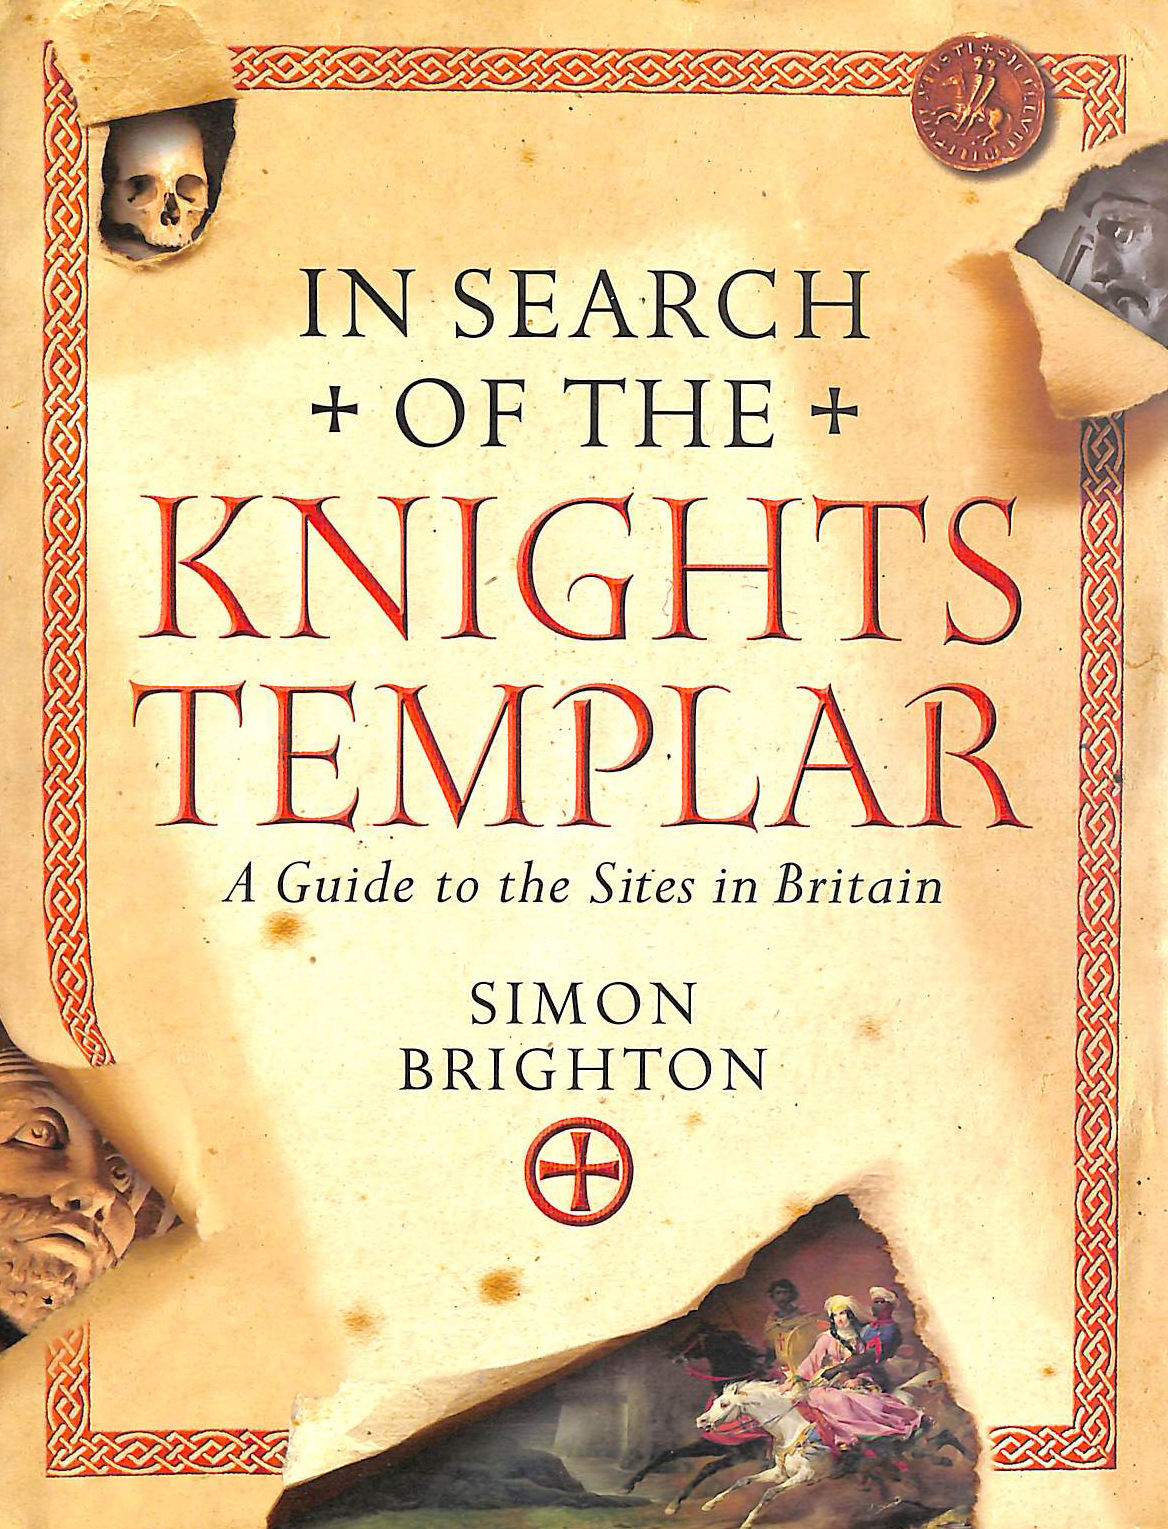 BRIGHTON, SIMON - In Search of the Knights Templar: A Guide to the Sites in Britain